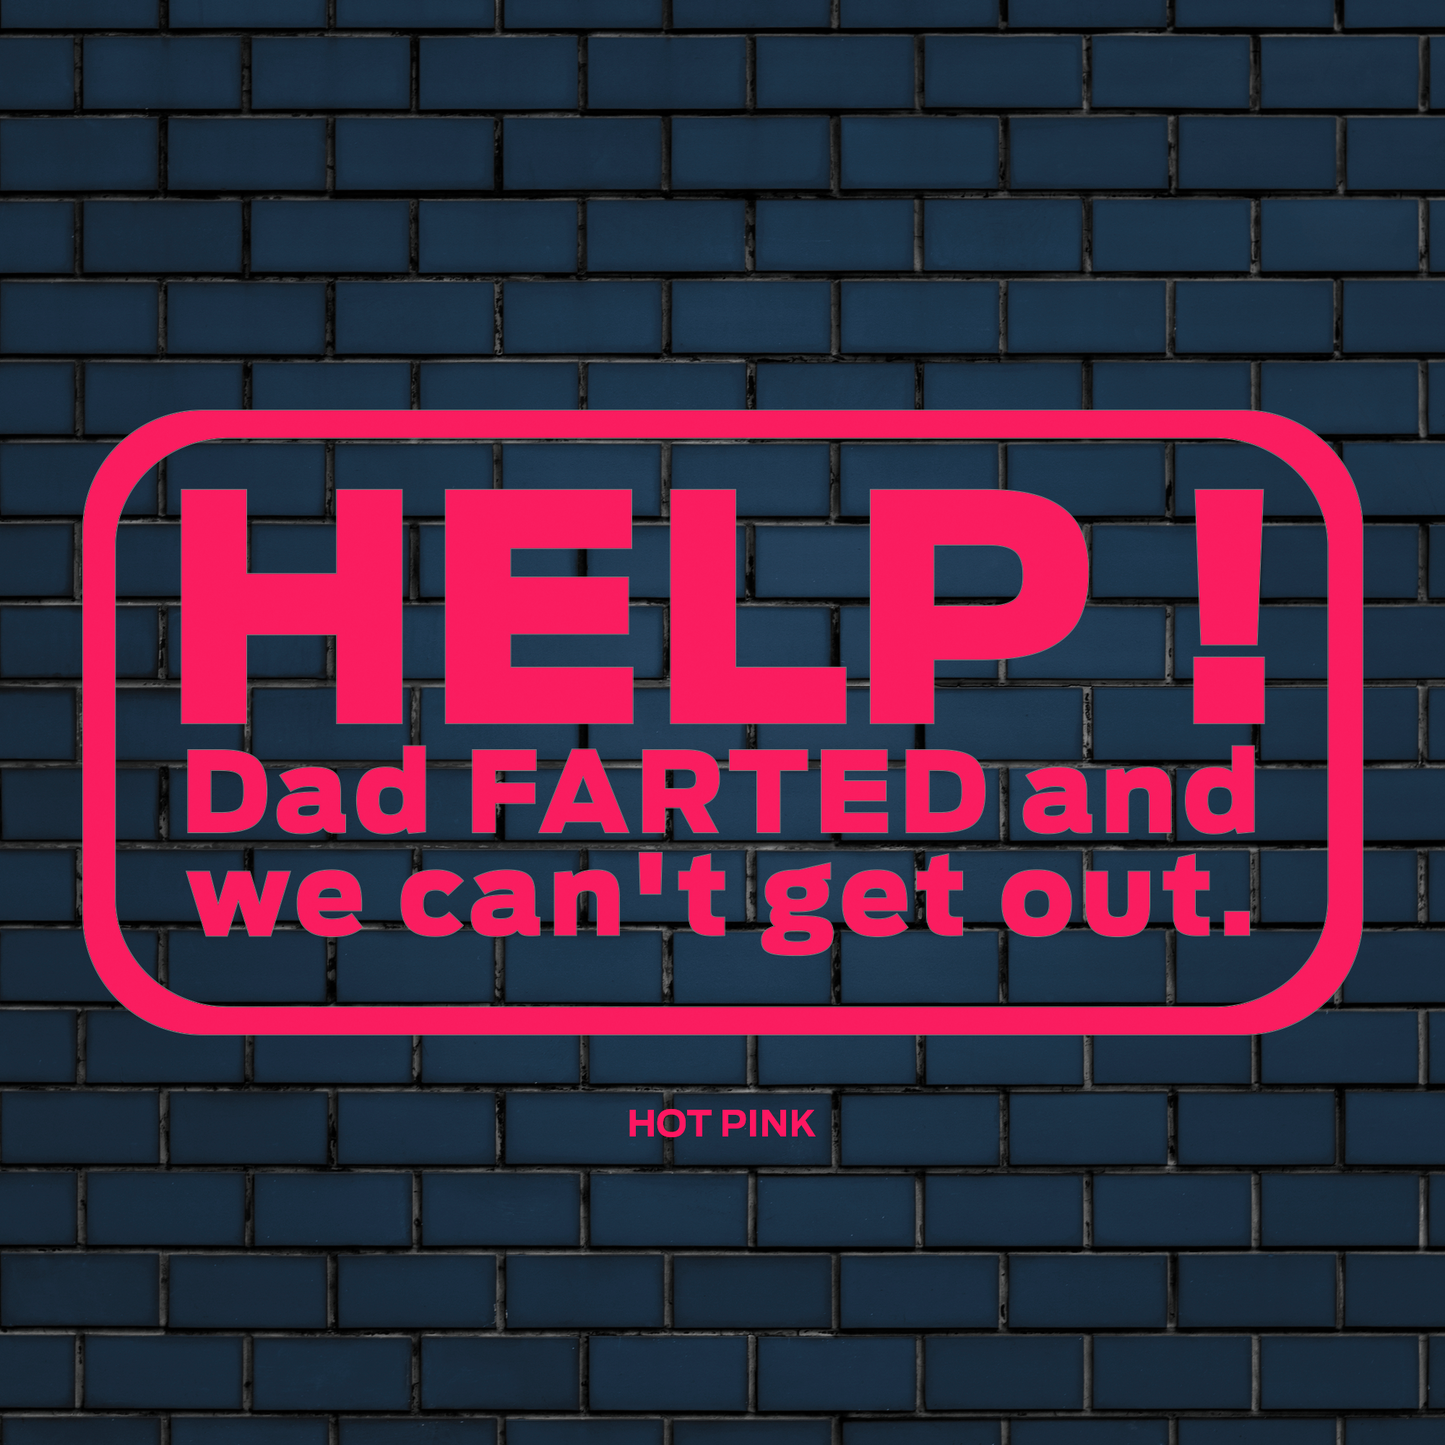 Help Dad farted and we can't get out decal